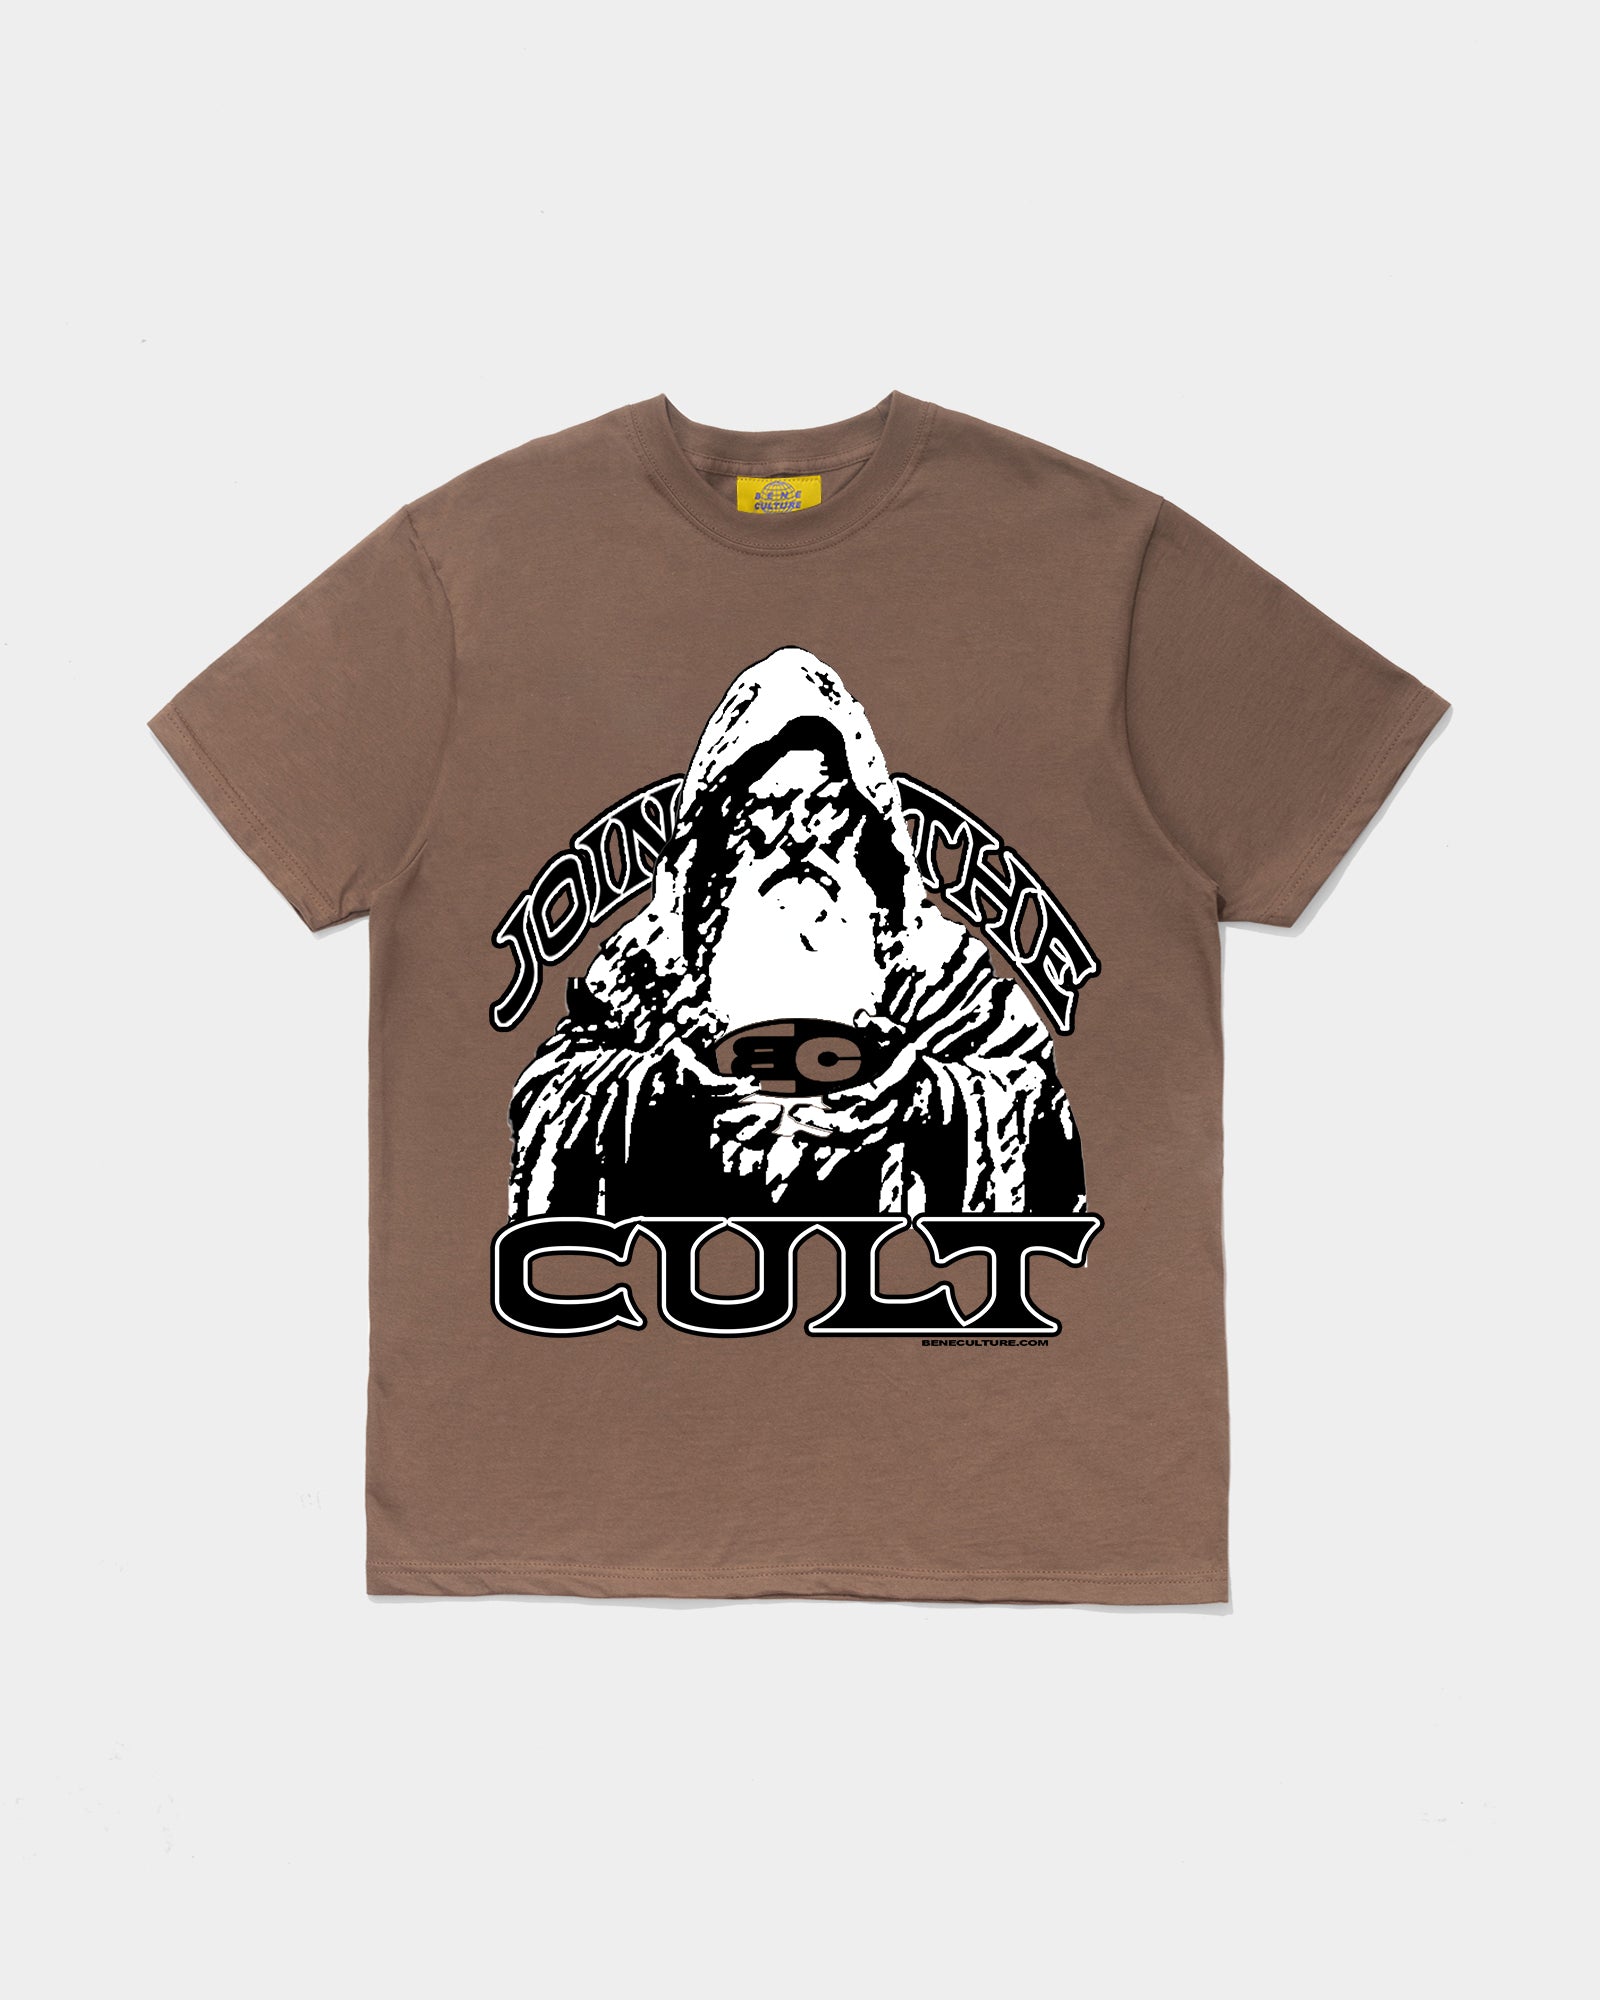 Join the Cult T-Shirt (Brown)